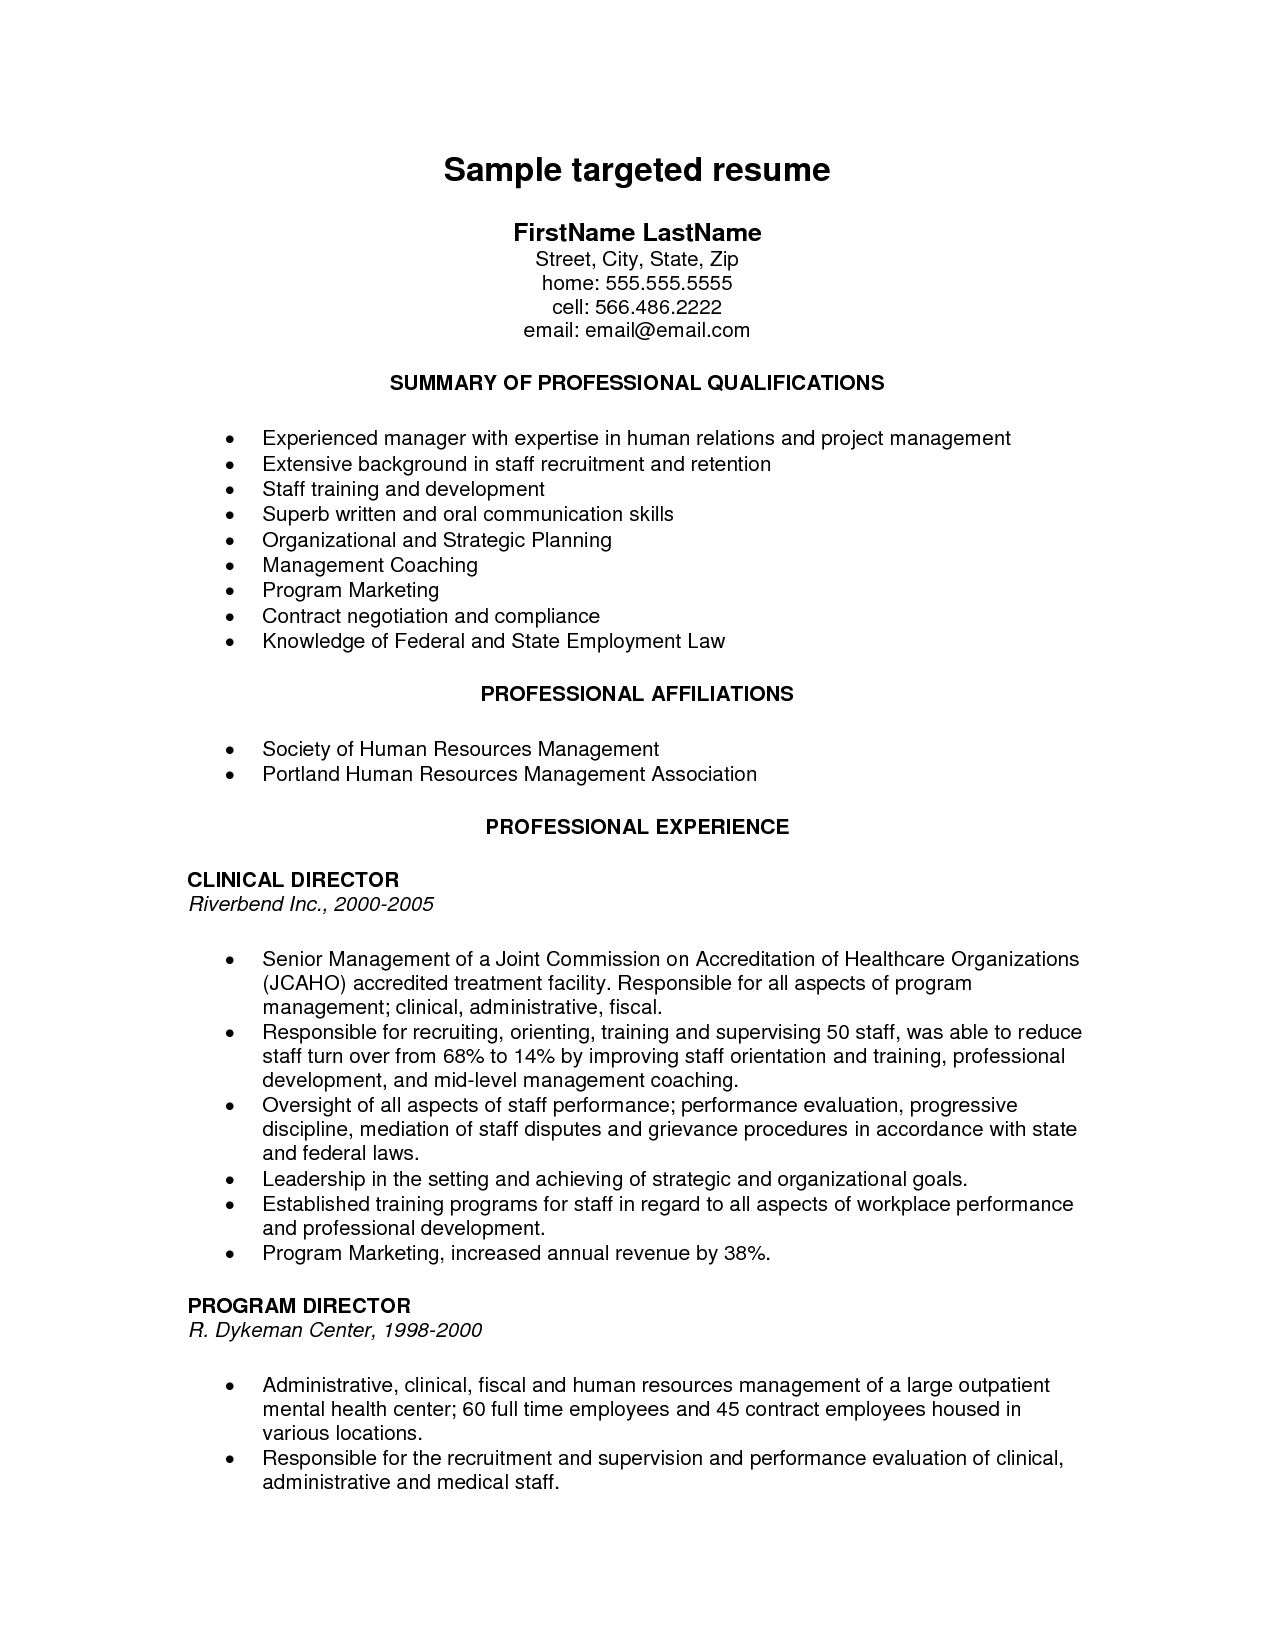 40++ Targeted resume format example That You Can Imitate